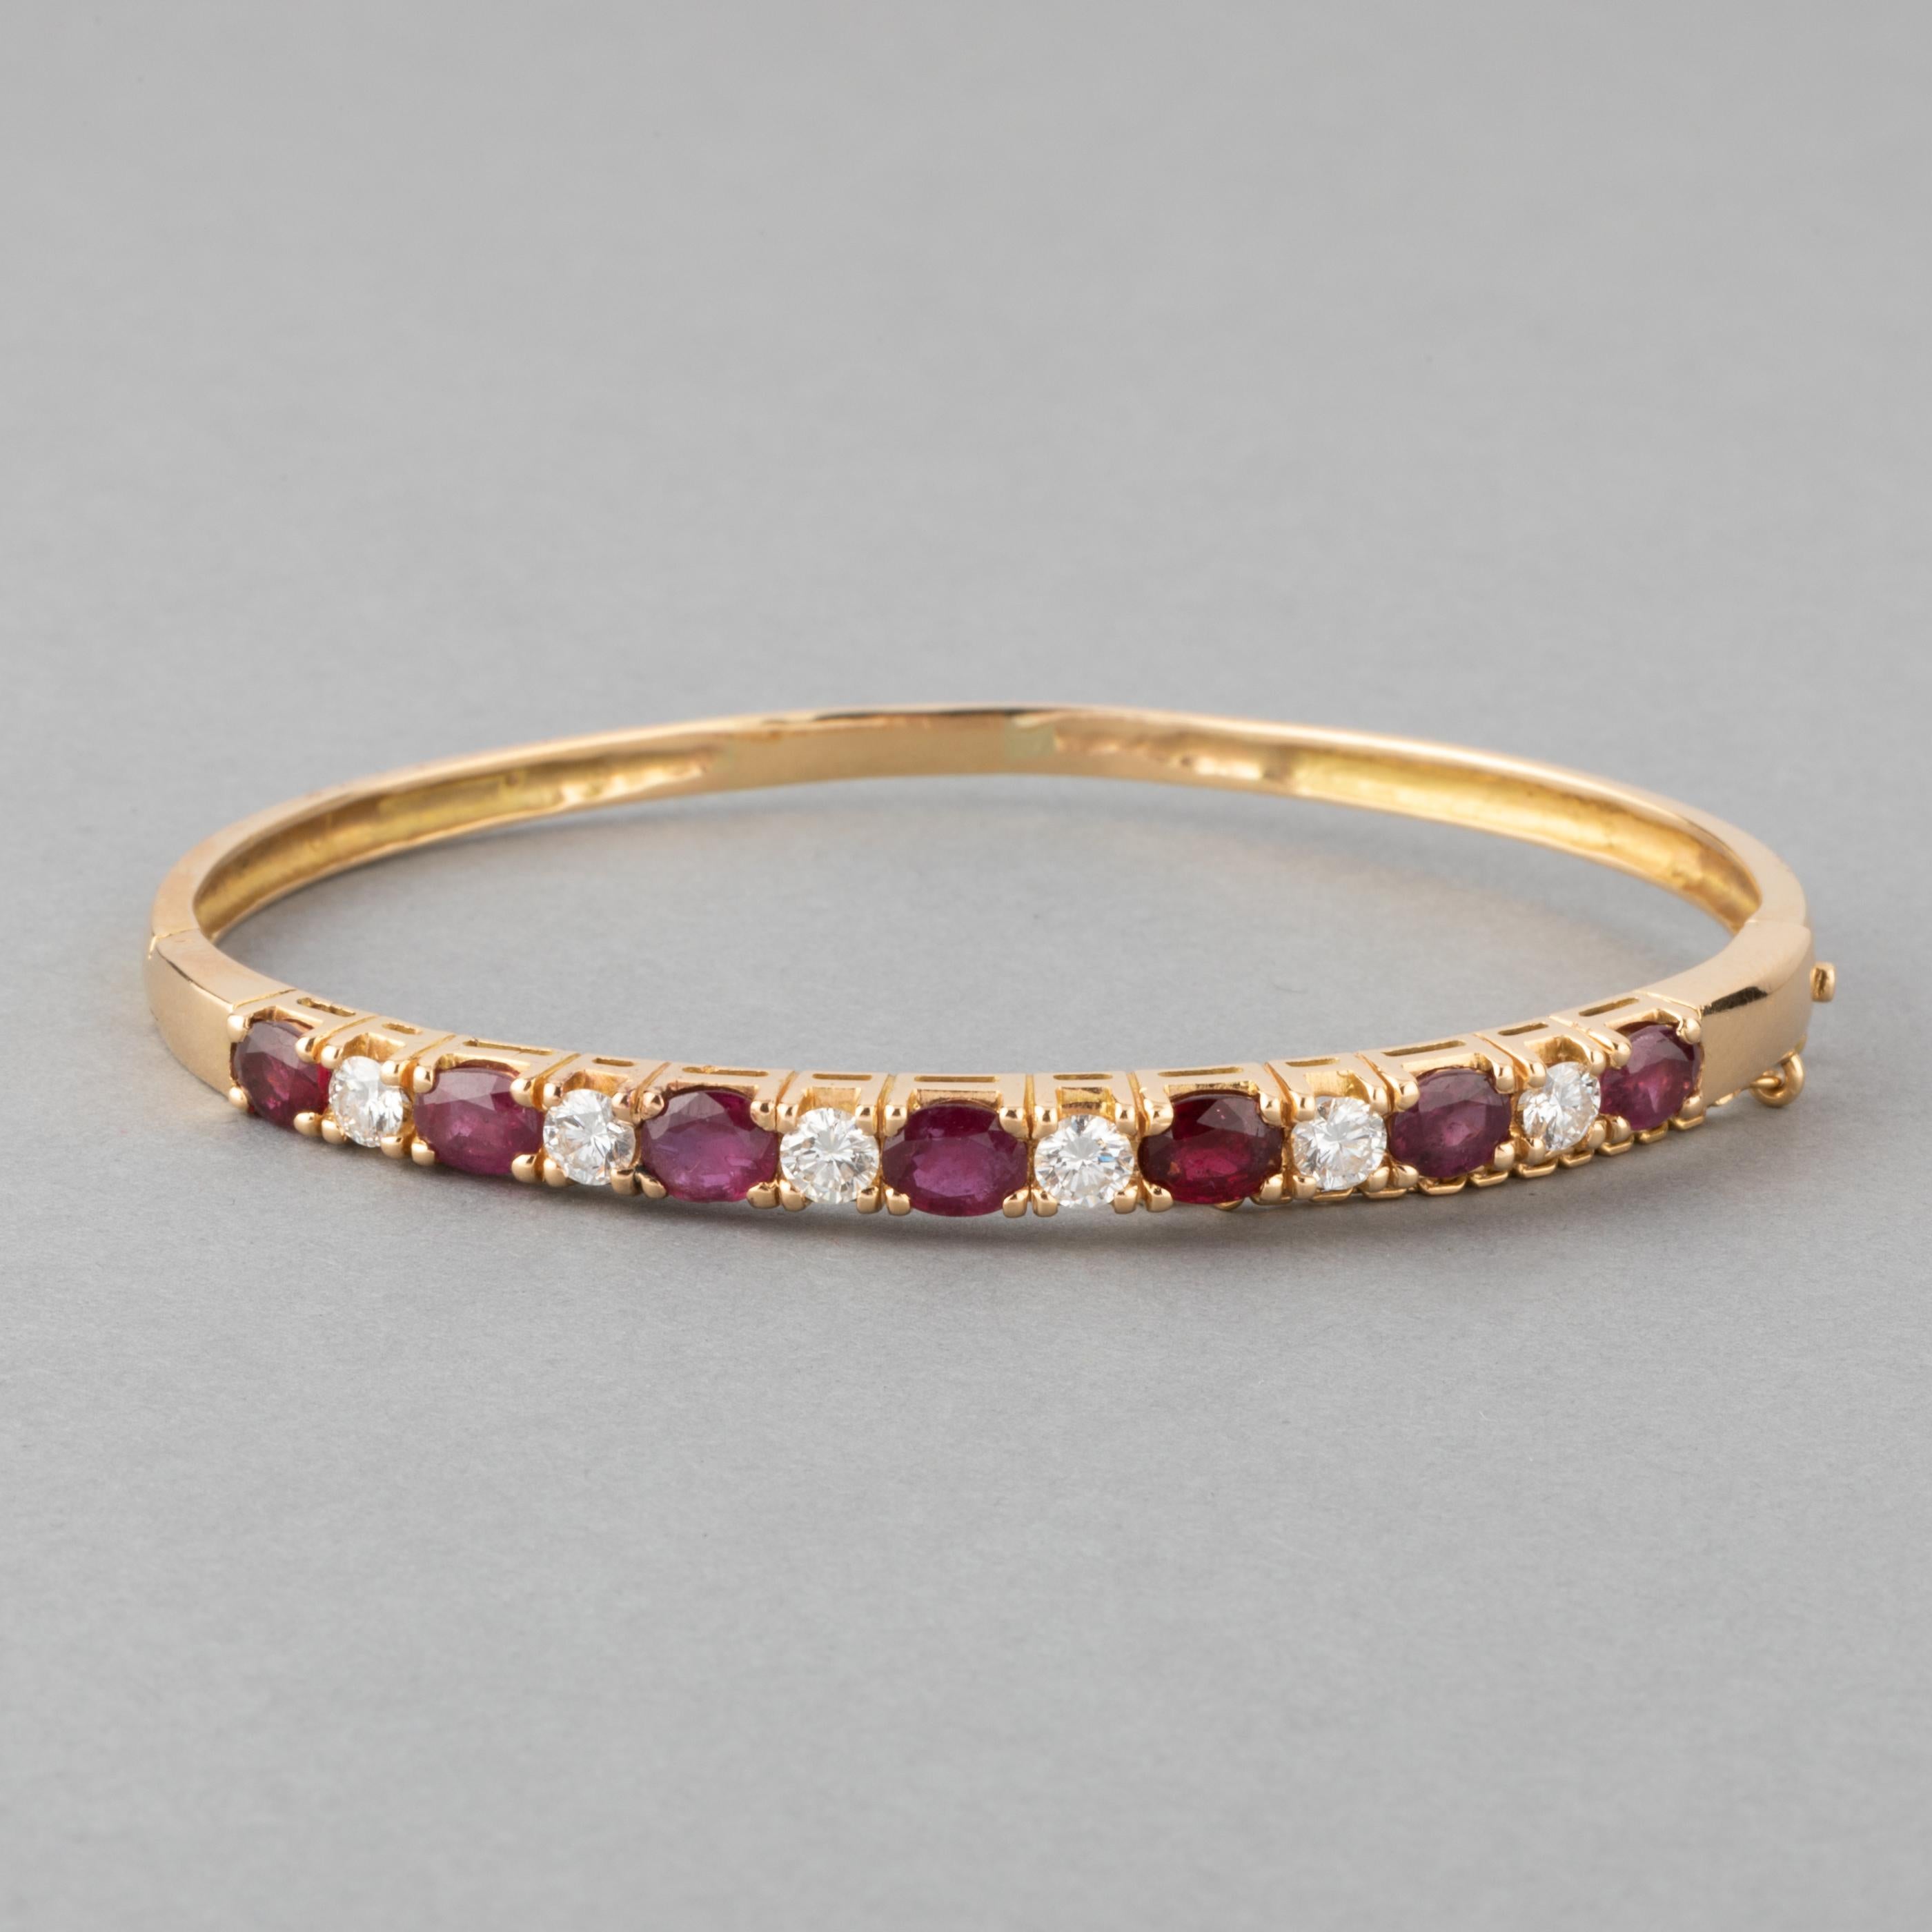 A very lovely bracelet, French vintage made.

Made in yellow gold 18k. Set with 1 carat of diamonds and 3.5 carats of rubies.

Inside diameter: 6.2 and 5.2 mm.

Weight: 15.90 grams